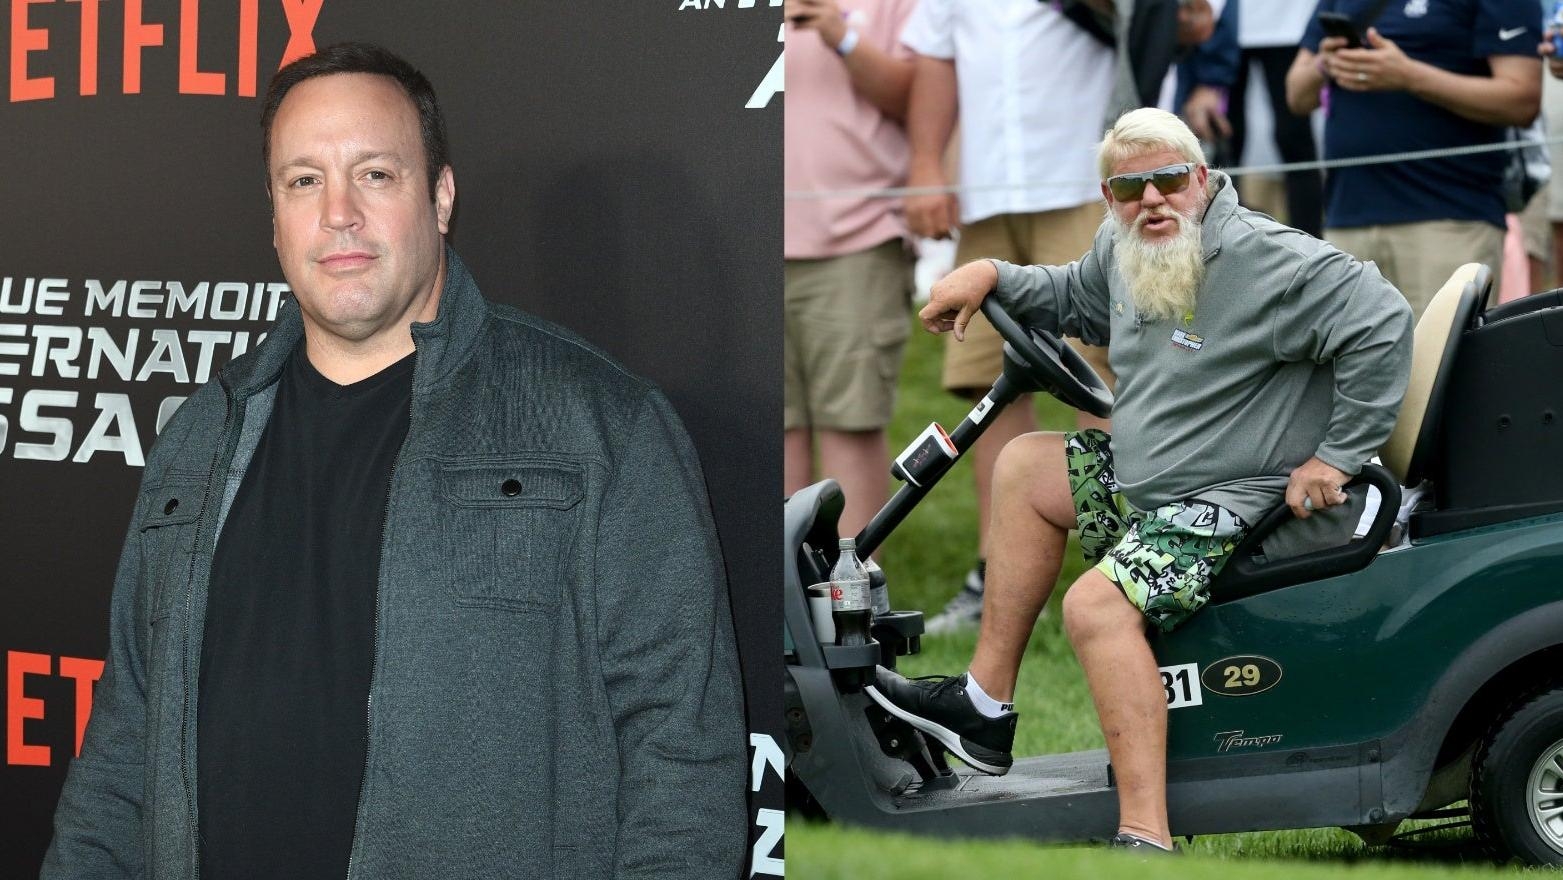 Kevin James to play pro golf “Wild Thing” John Daly in limited series